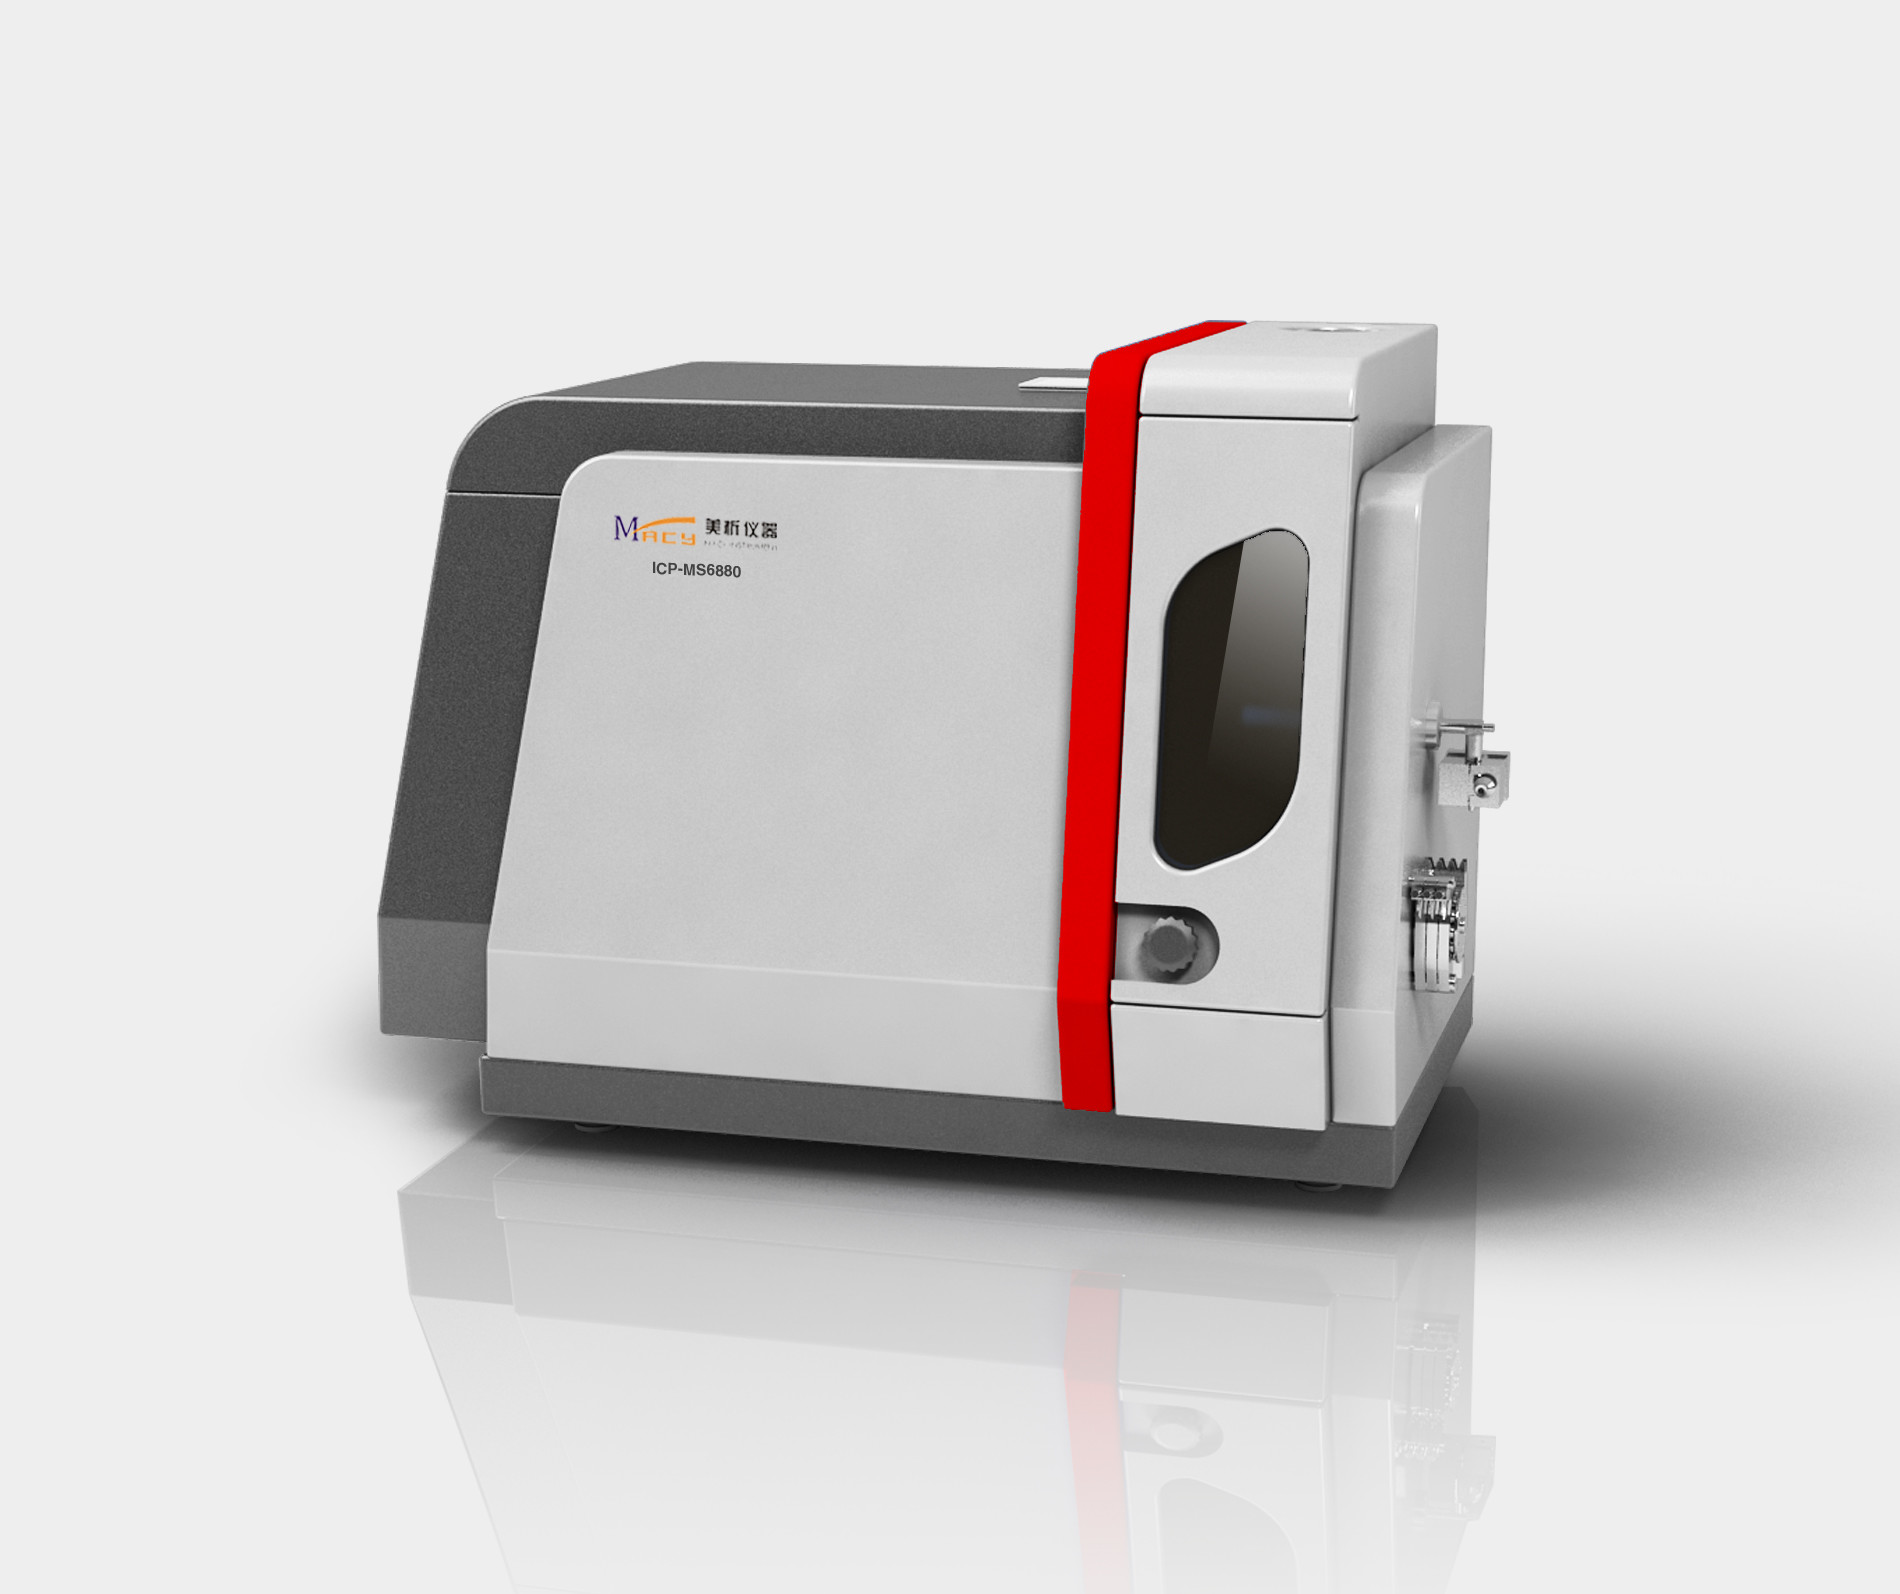 Wholesale Universal Benchtop Mass Spectrometer Lower Snr And Lower Detect Limit Of  Icp-Ms6880 from china suppliers